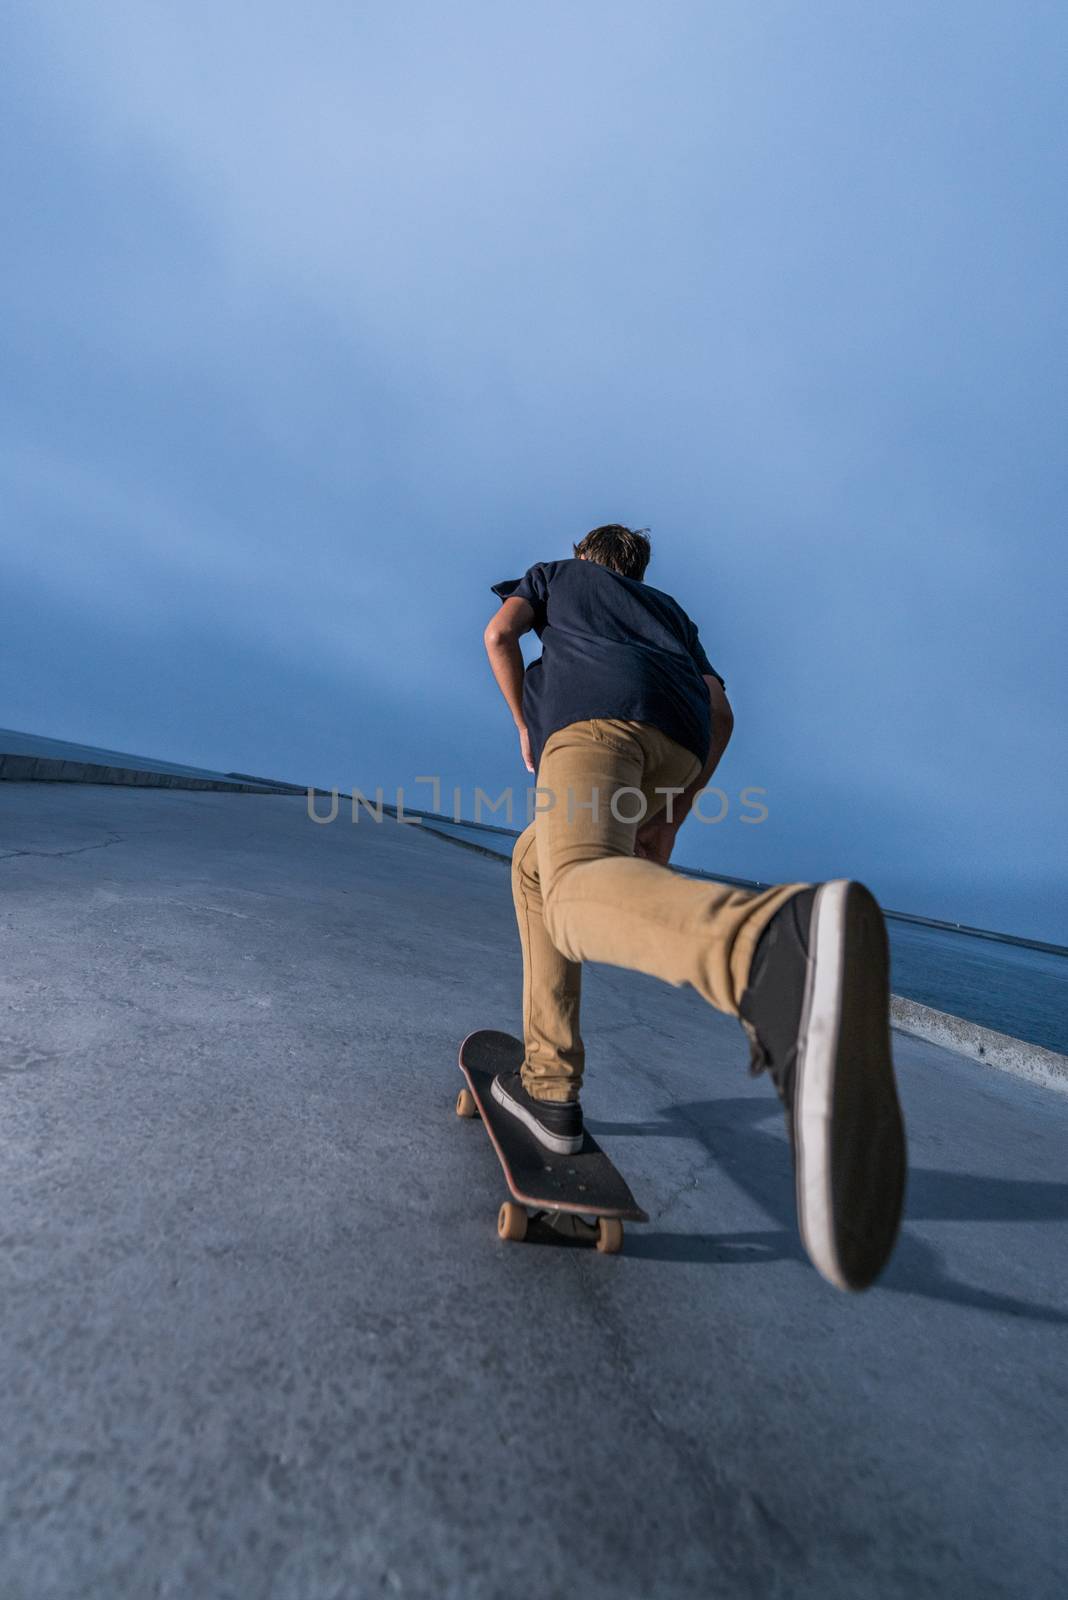 Skateboarder pushing on a concrete pavement along the harbour.